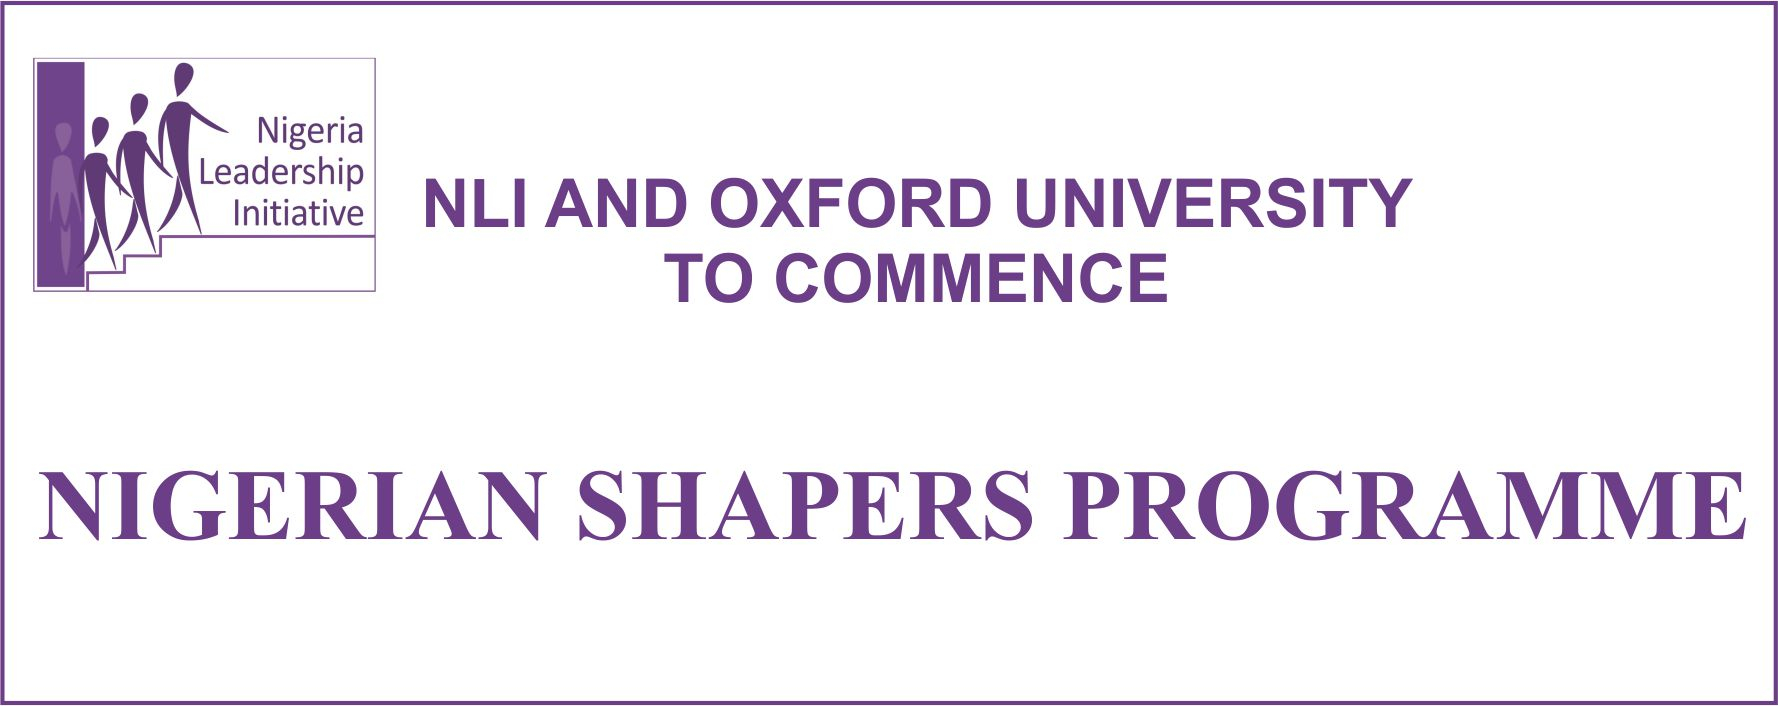 NLI AND OXFORD UNIVERSITY: “NIGERIAN SHAPERS” PROGRAMME